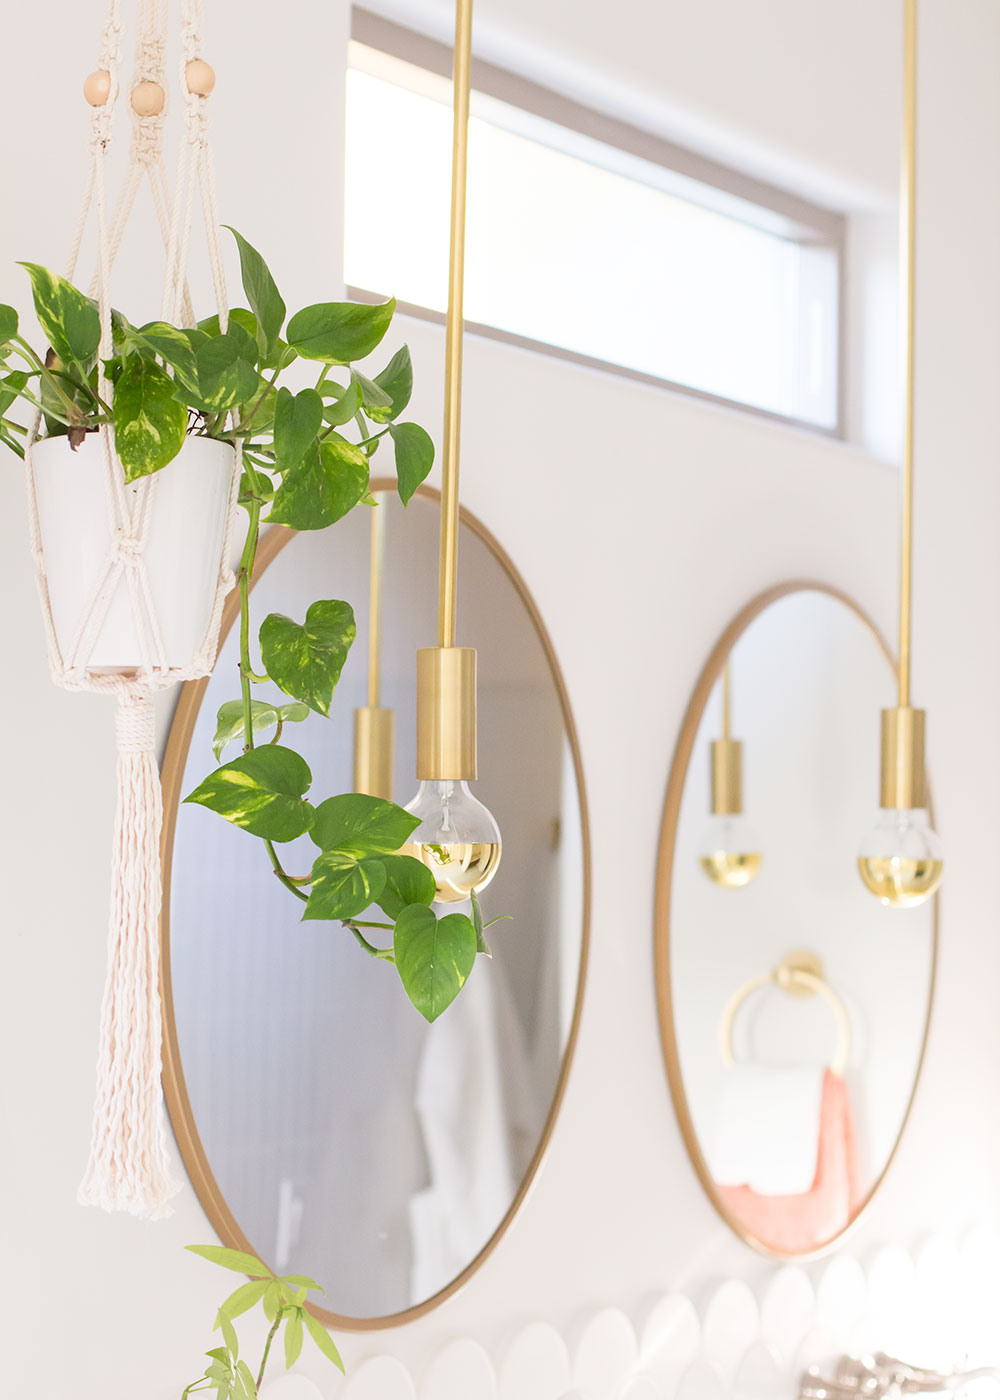 pretty gold accents with lots of plants in this master bathroom reveal | thelovedesignedlife.com #masterbathroom #bathroomremodel